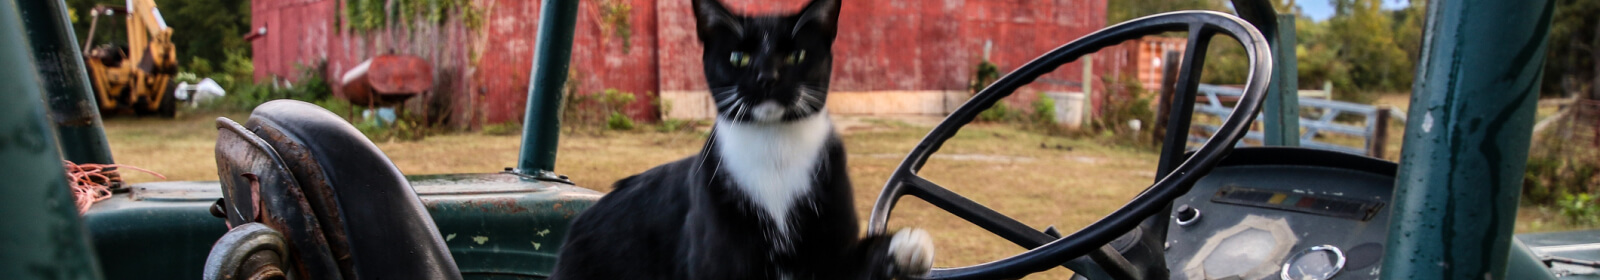 A cat seated on a tractor